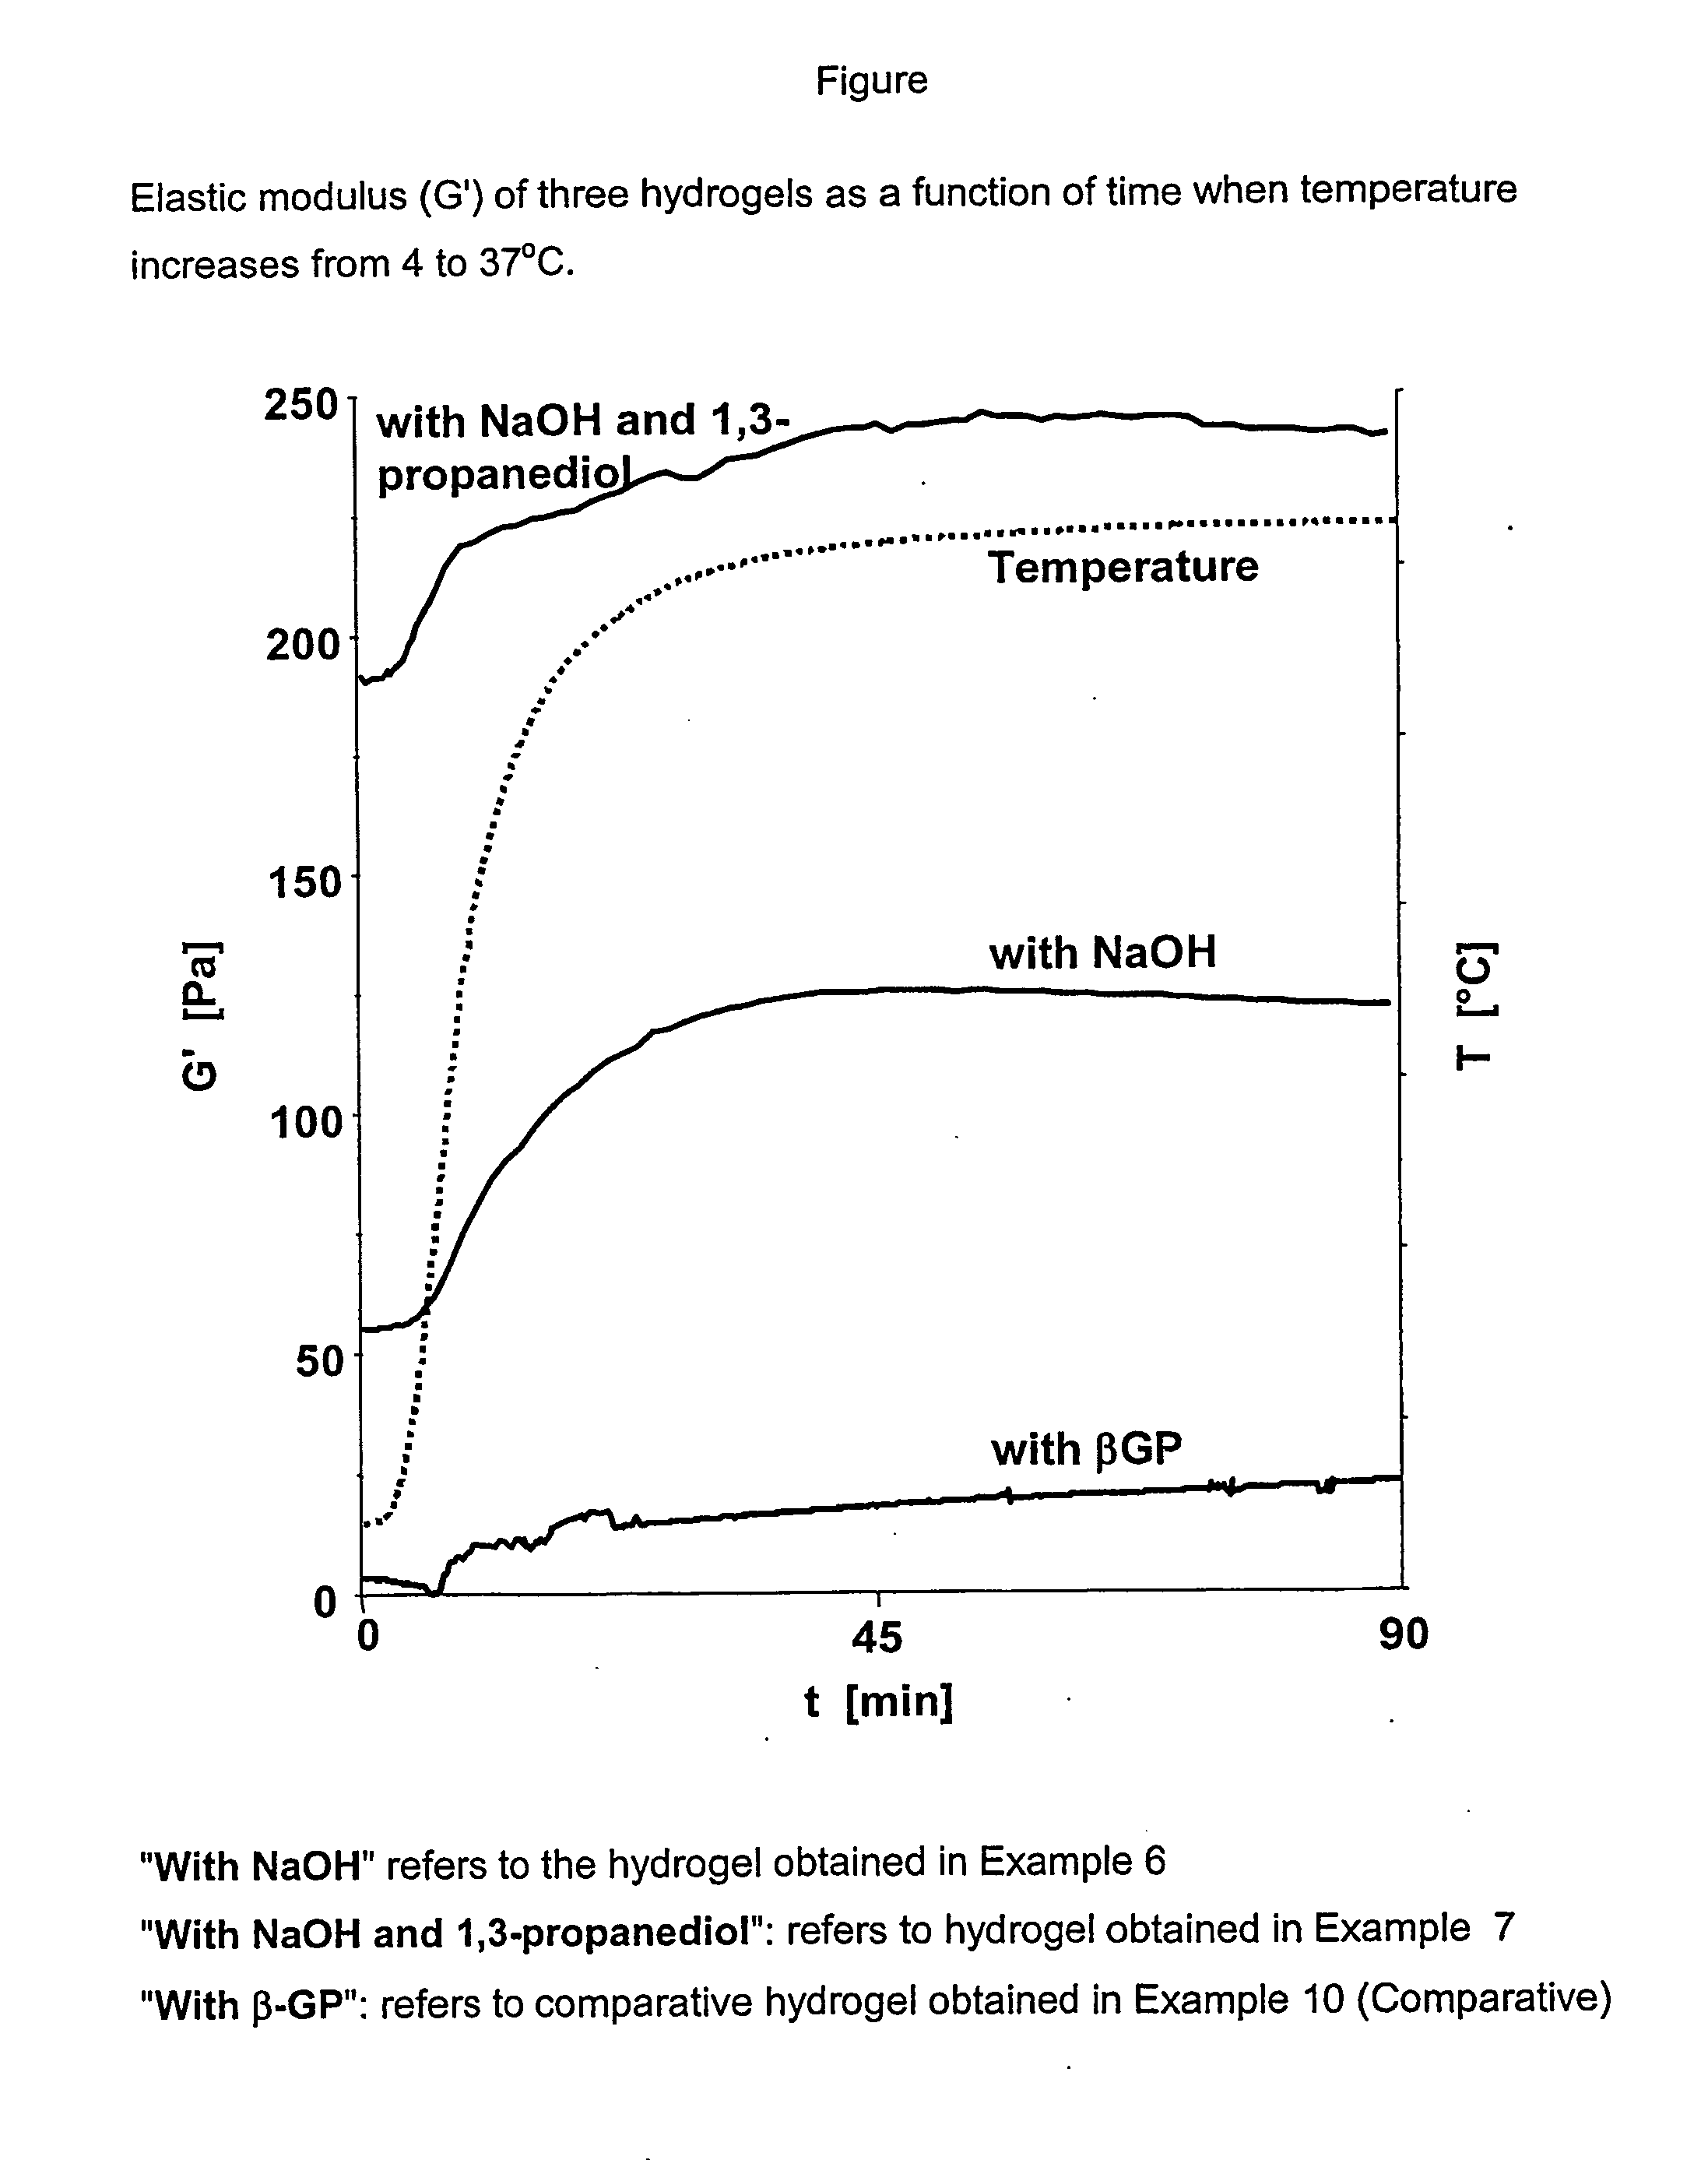 Pseudo-thermosetting neutralized chitosan composition forming a hydrogel and a process for producing the same